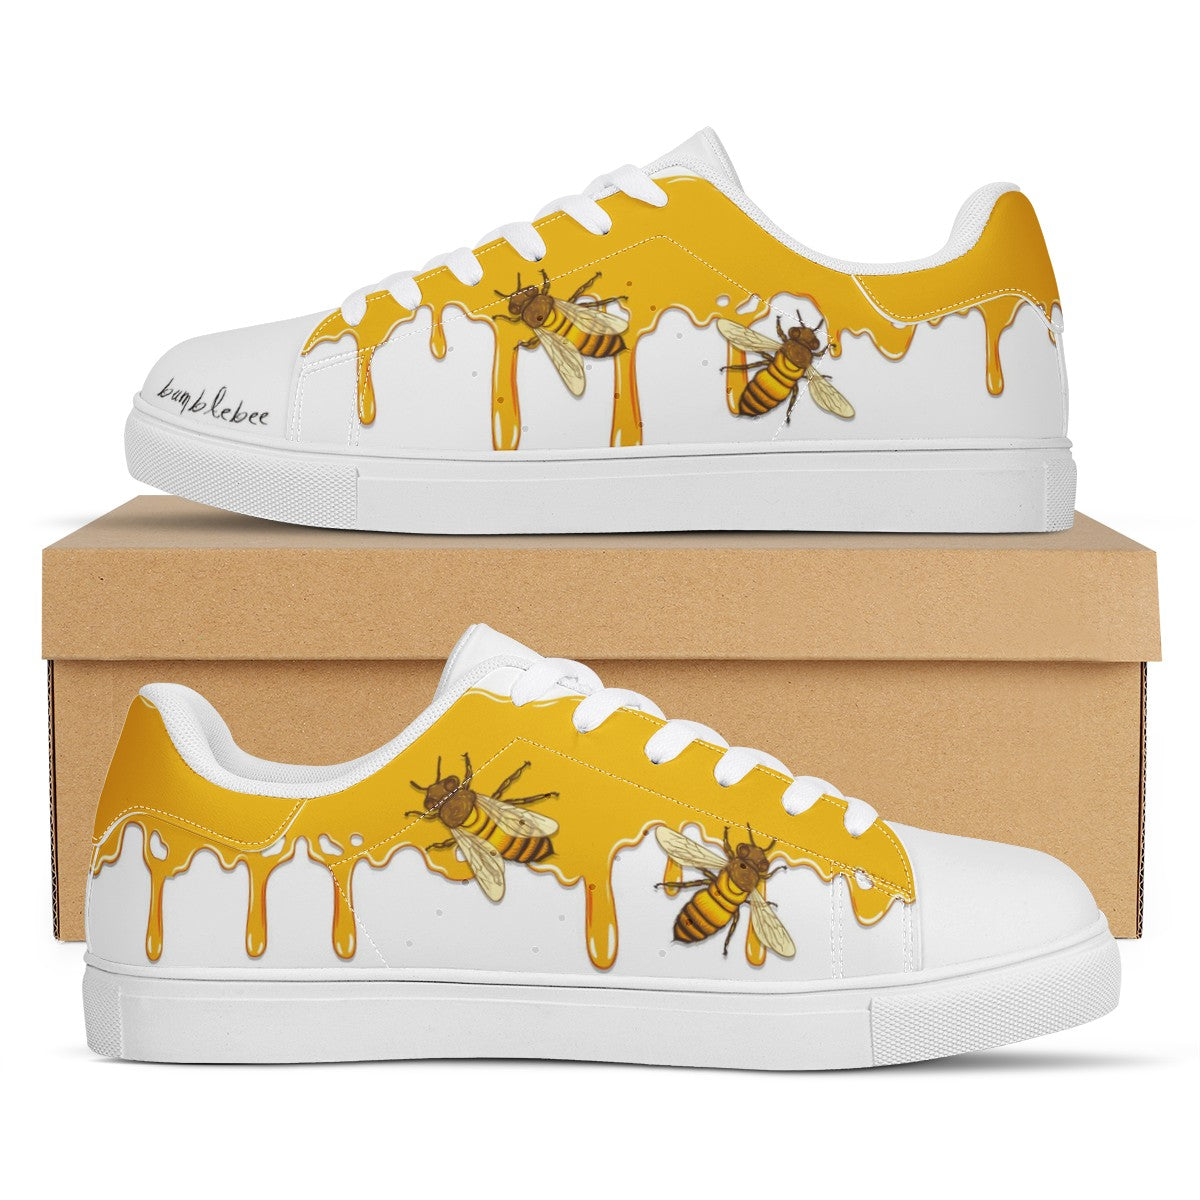 Bumblebee Low Top Leather Shoes